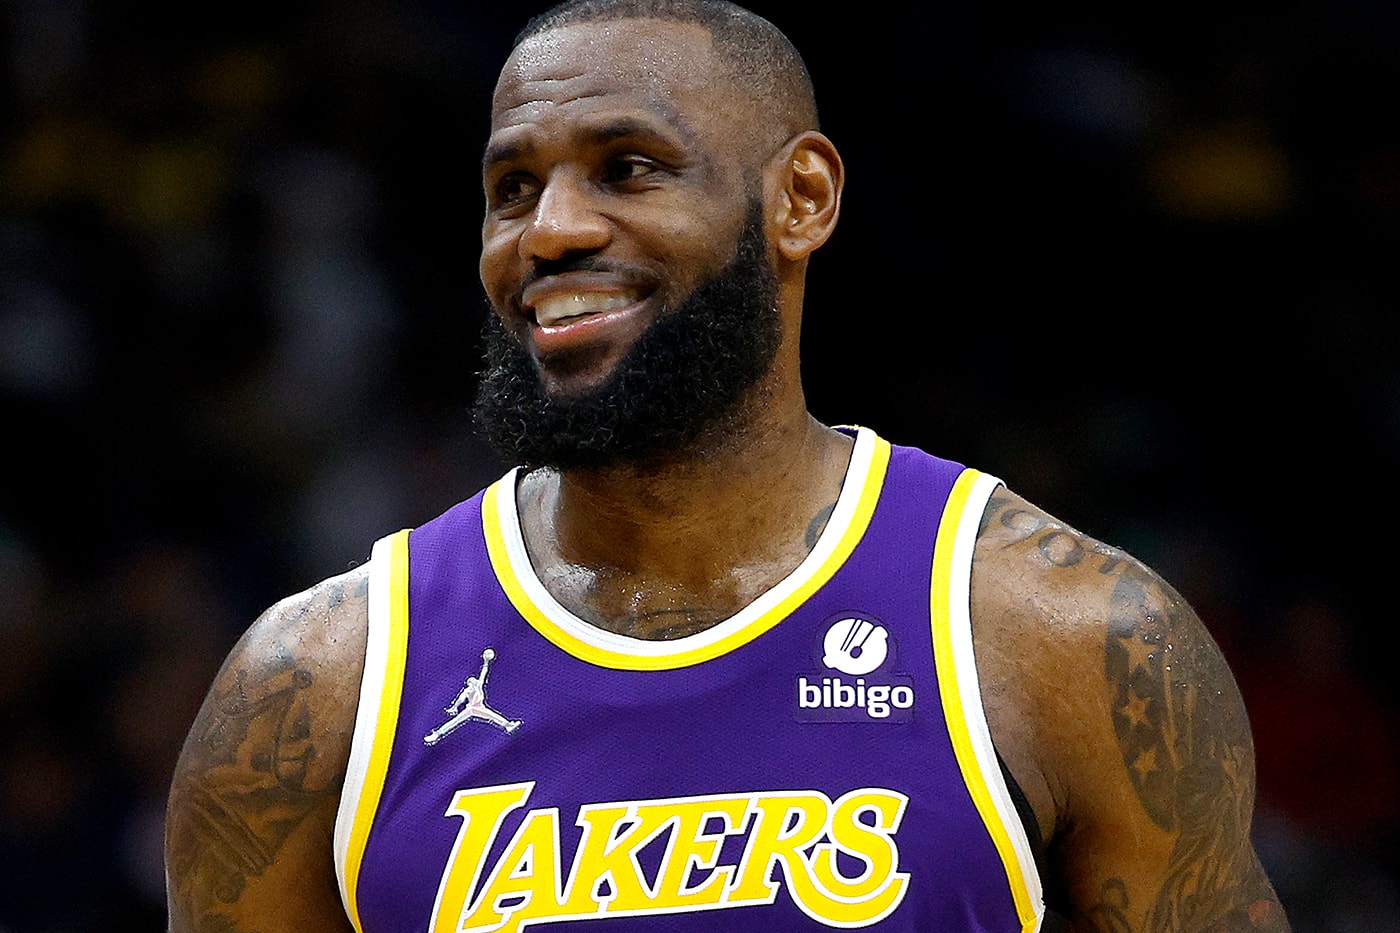 Lebron James Origin Story Biopic Arriving 2023 Shooting Stars follows James' high school years in Akron film movie terence winter beats buzz bissinger news info